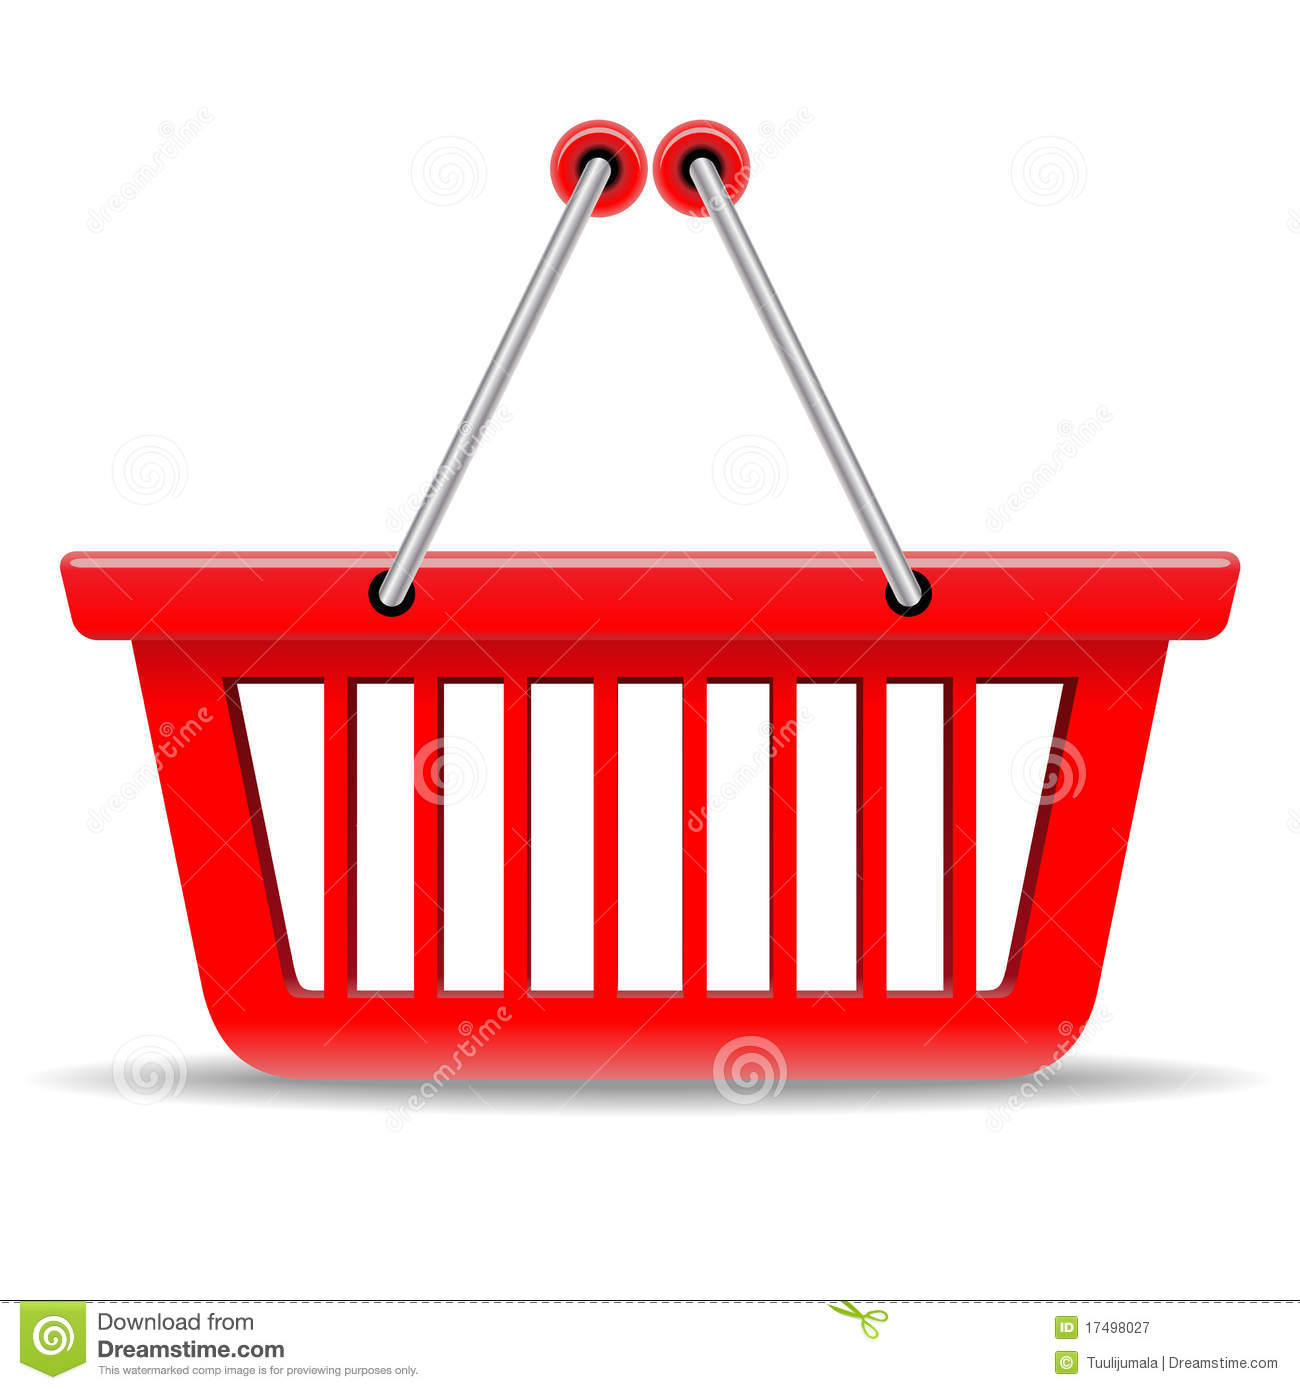 Grocery Basket Clipart Red Shopping Basket Royalty